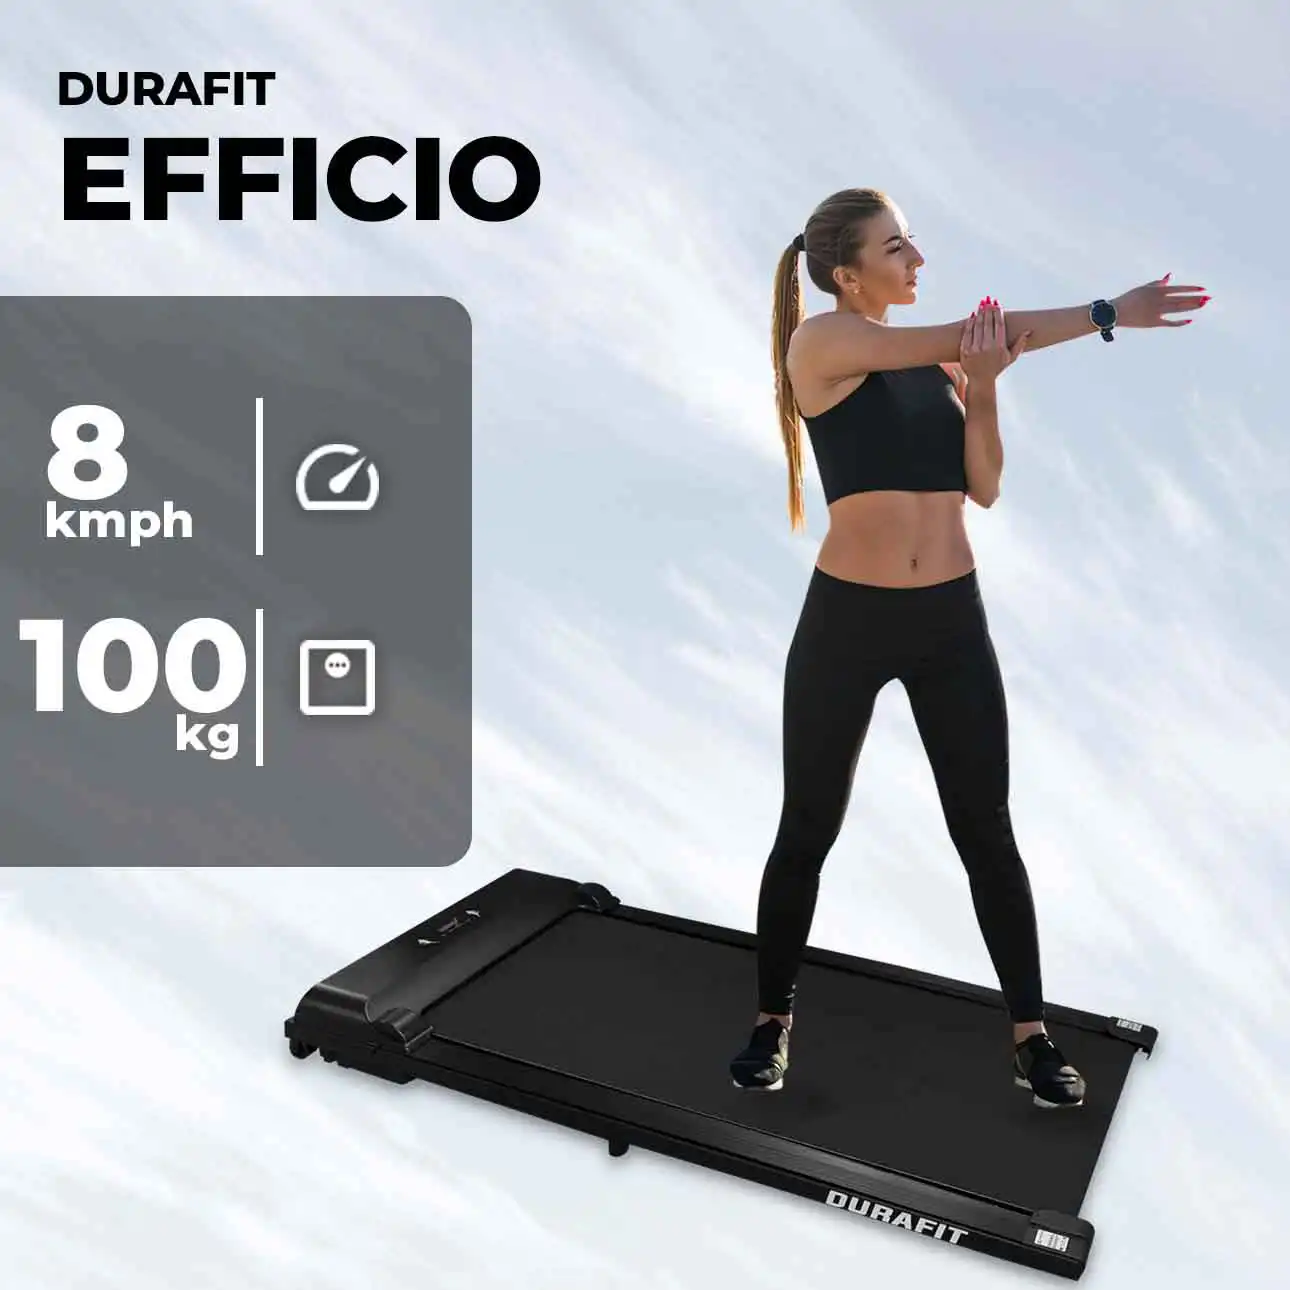 Durafit Efficio Black Treadmill with 8kmph and 100kg user weight